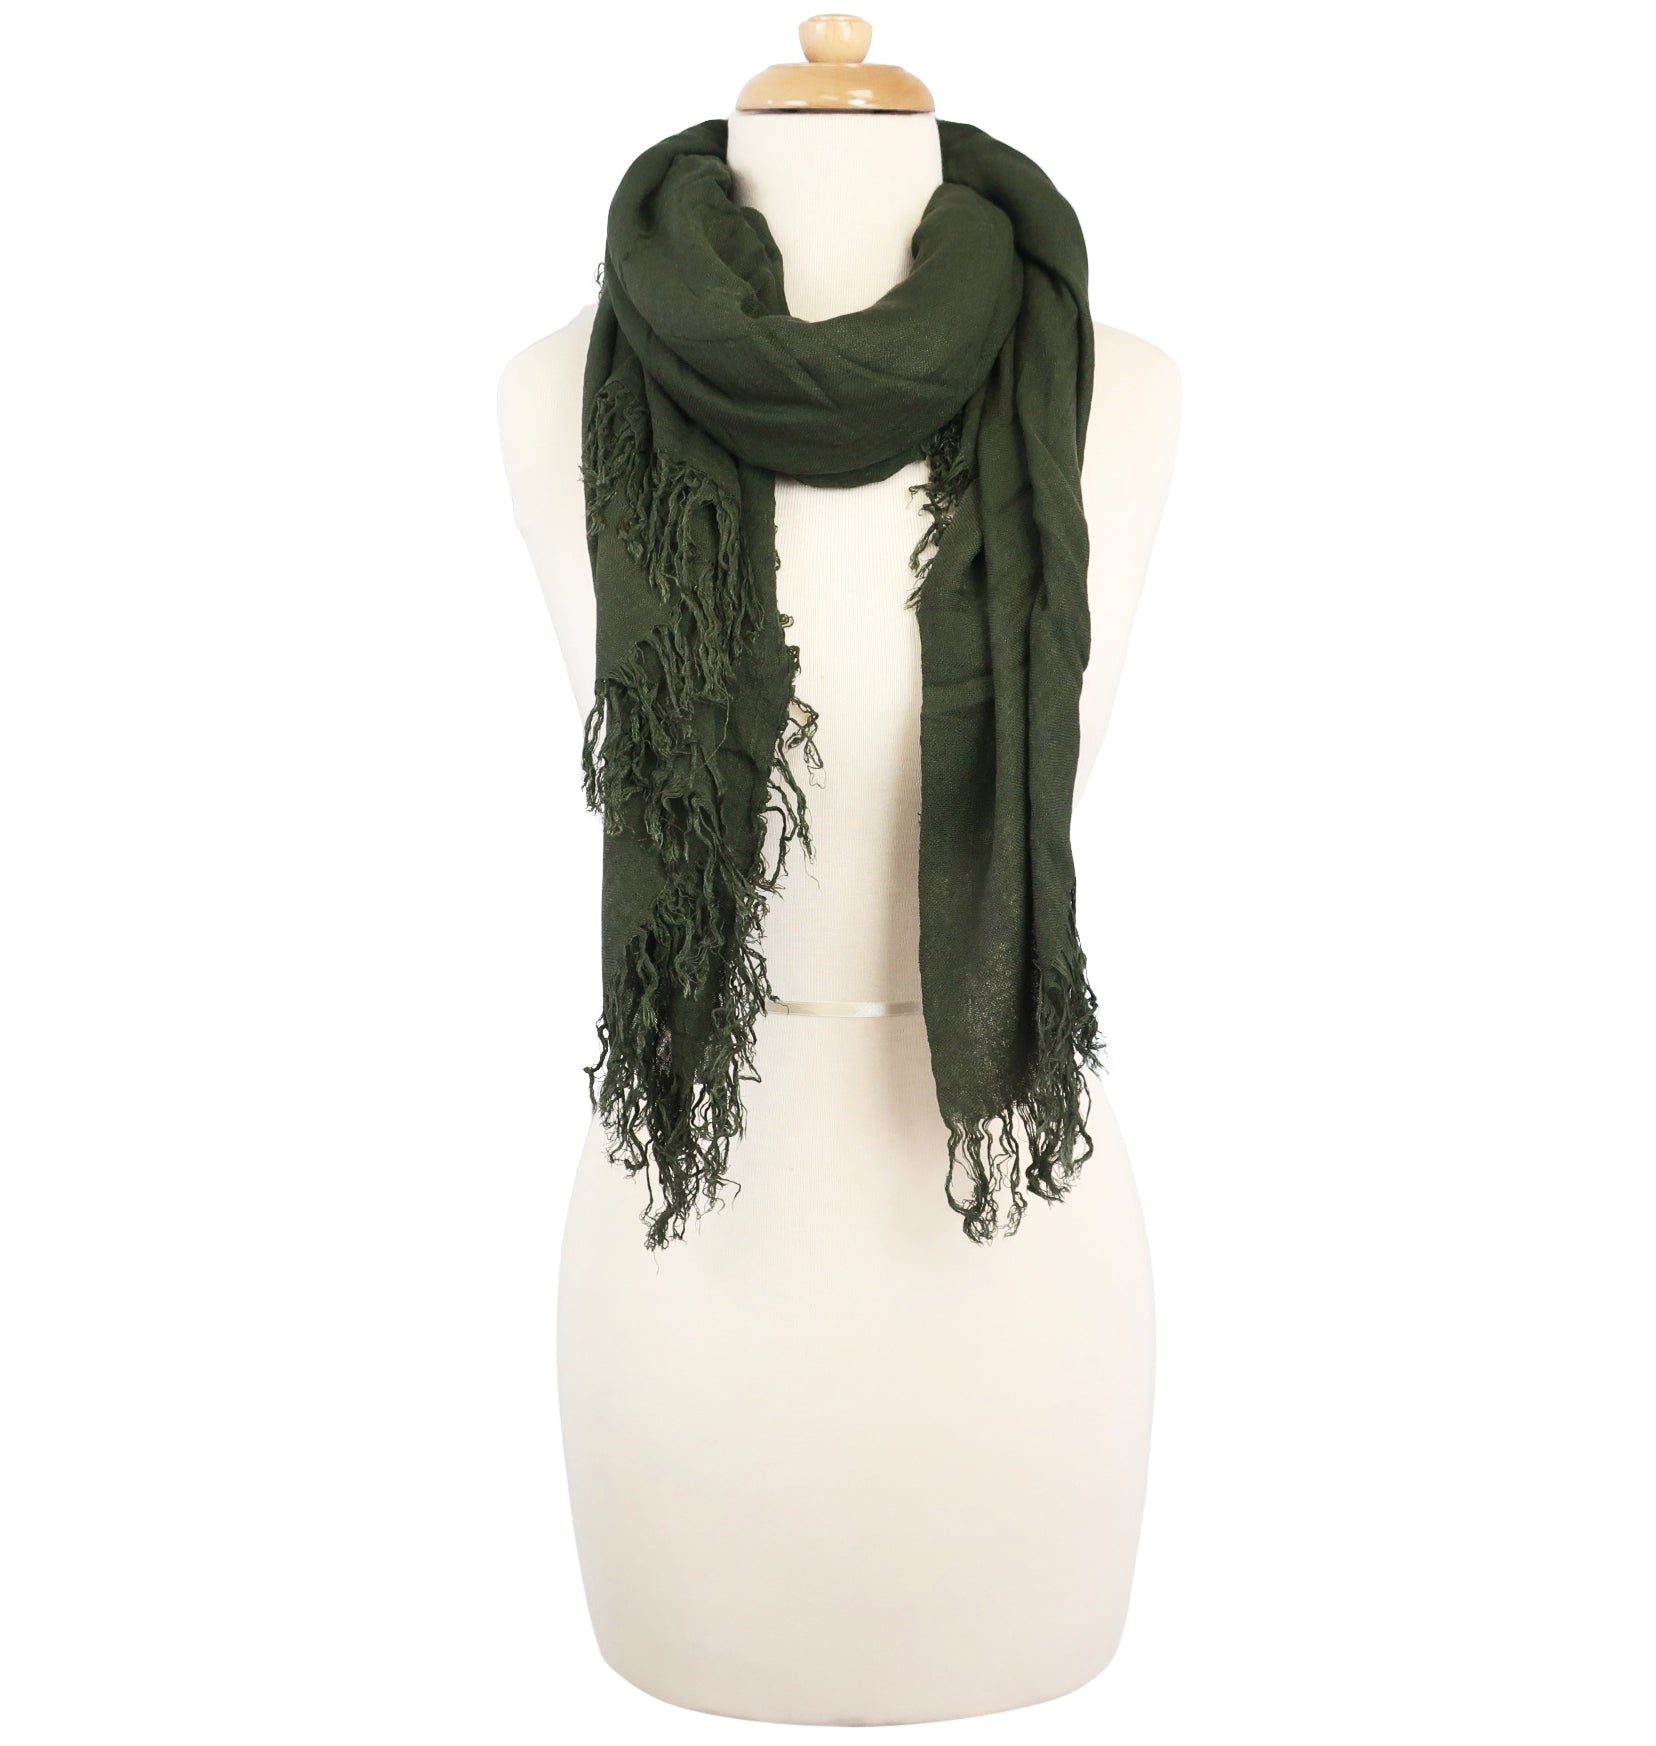 Blue Pacific Tissue Solid Modal and Cashmere Scarf in Deep Dark Forest Green